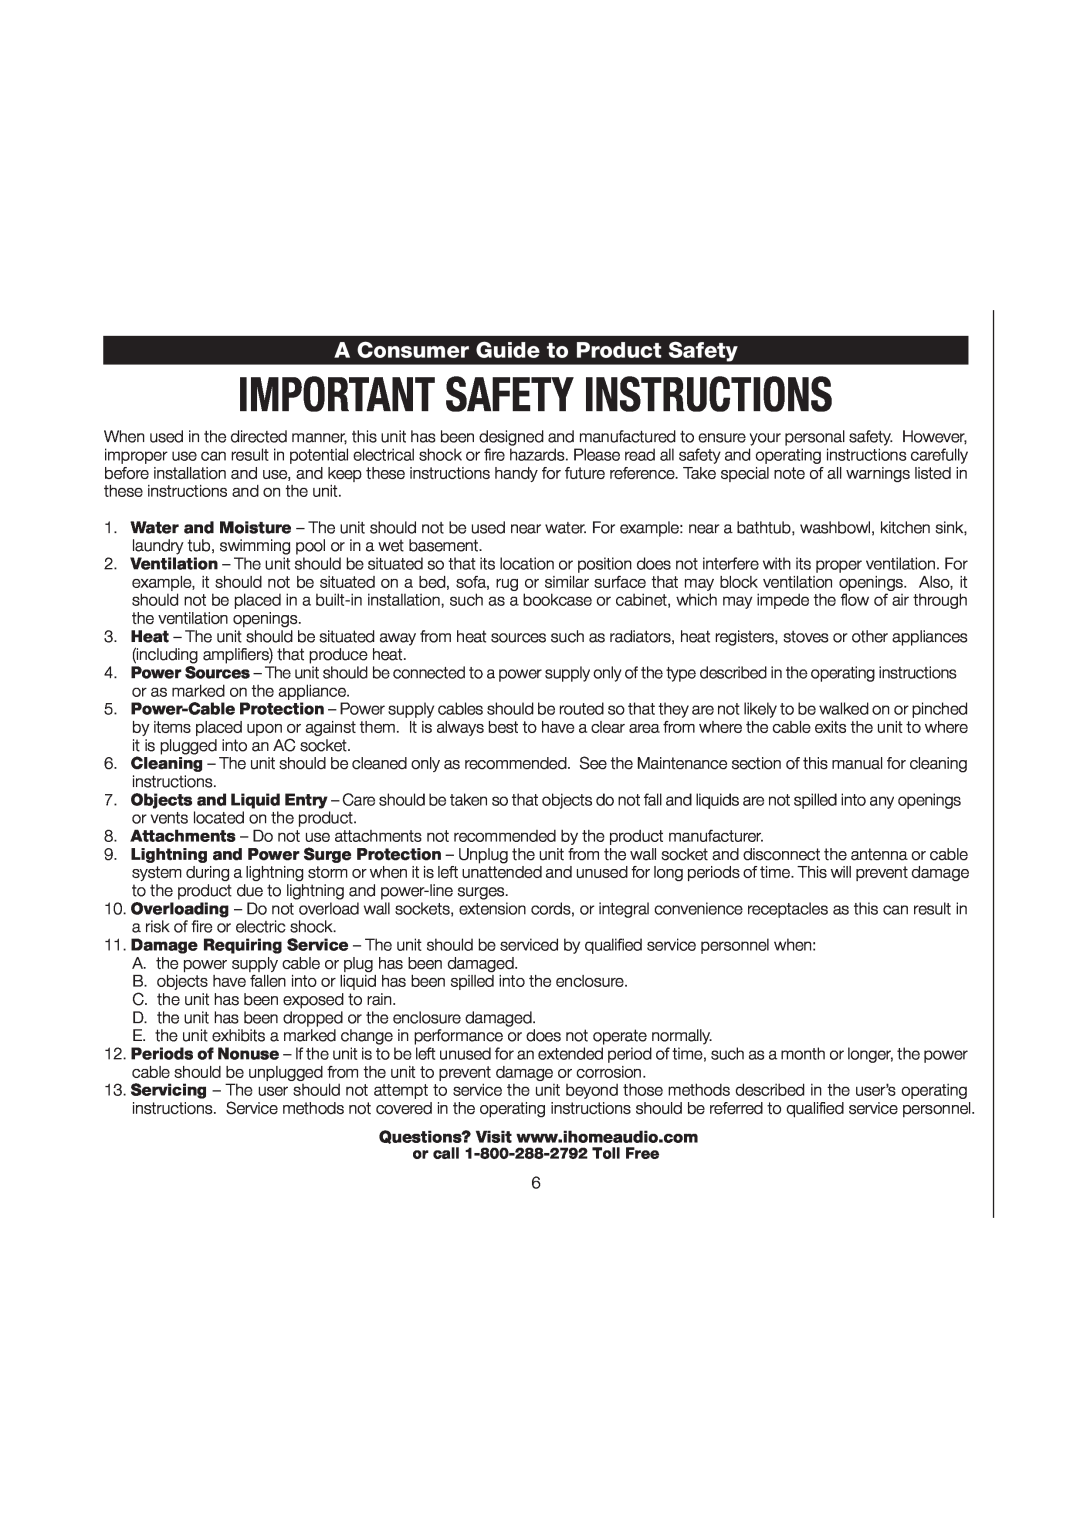 iHome iP71 manual A Consumer Guide to Product Safety 